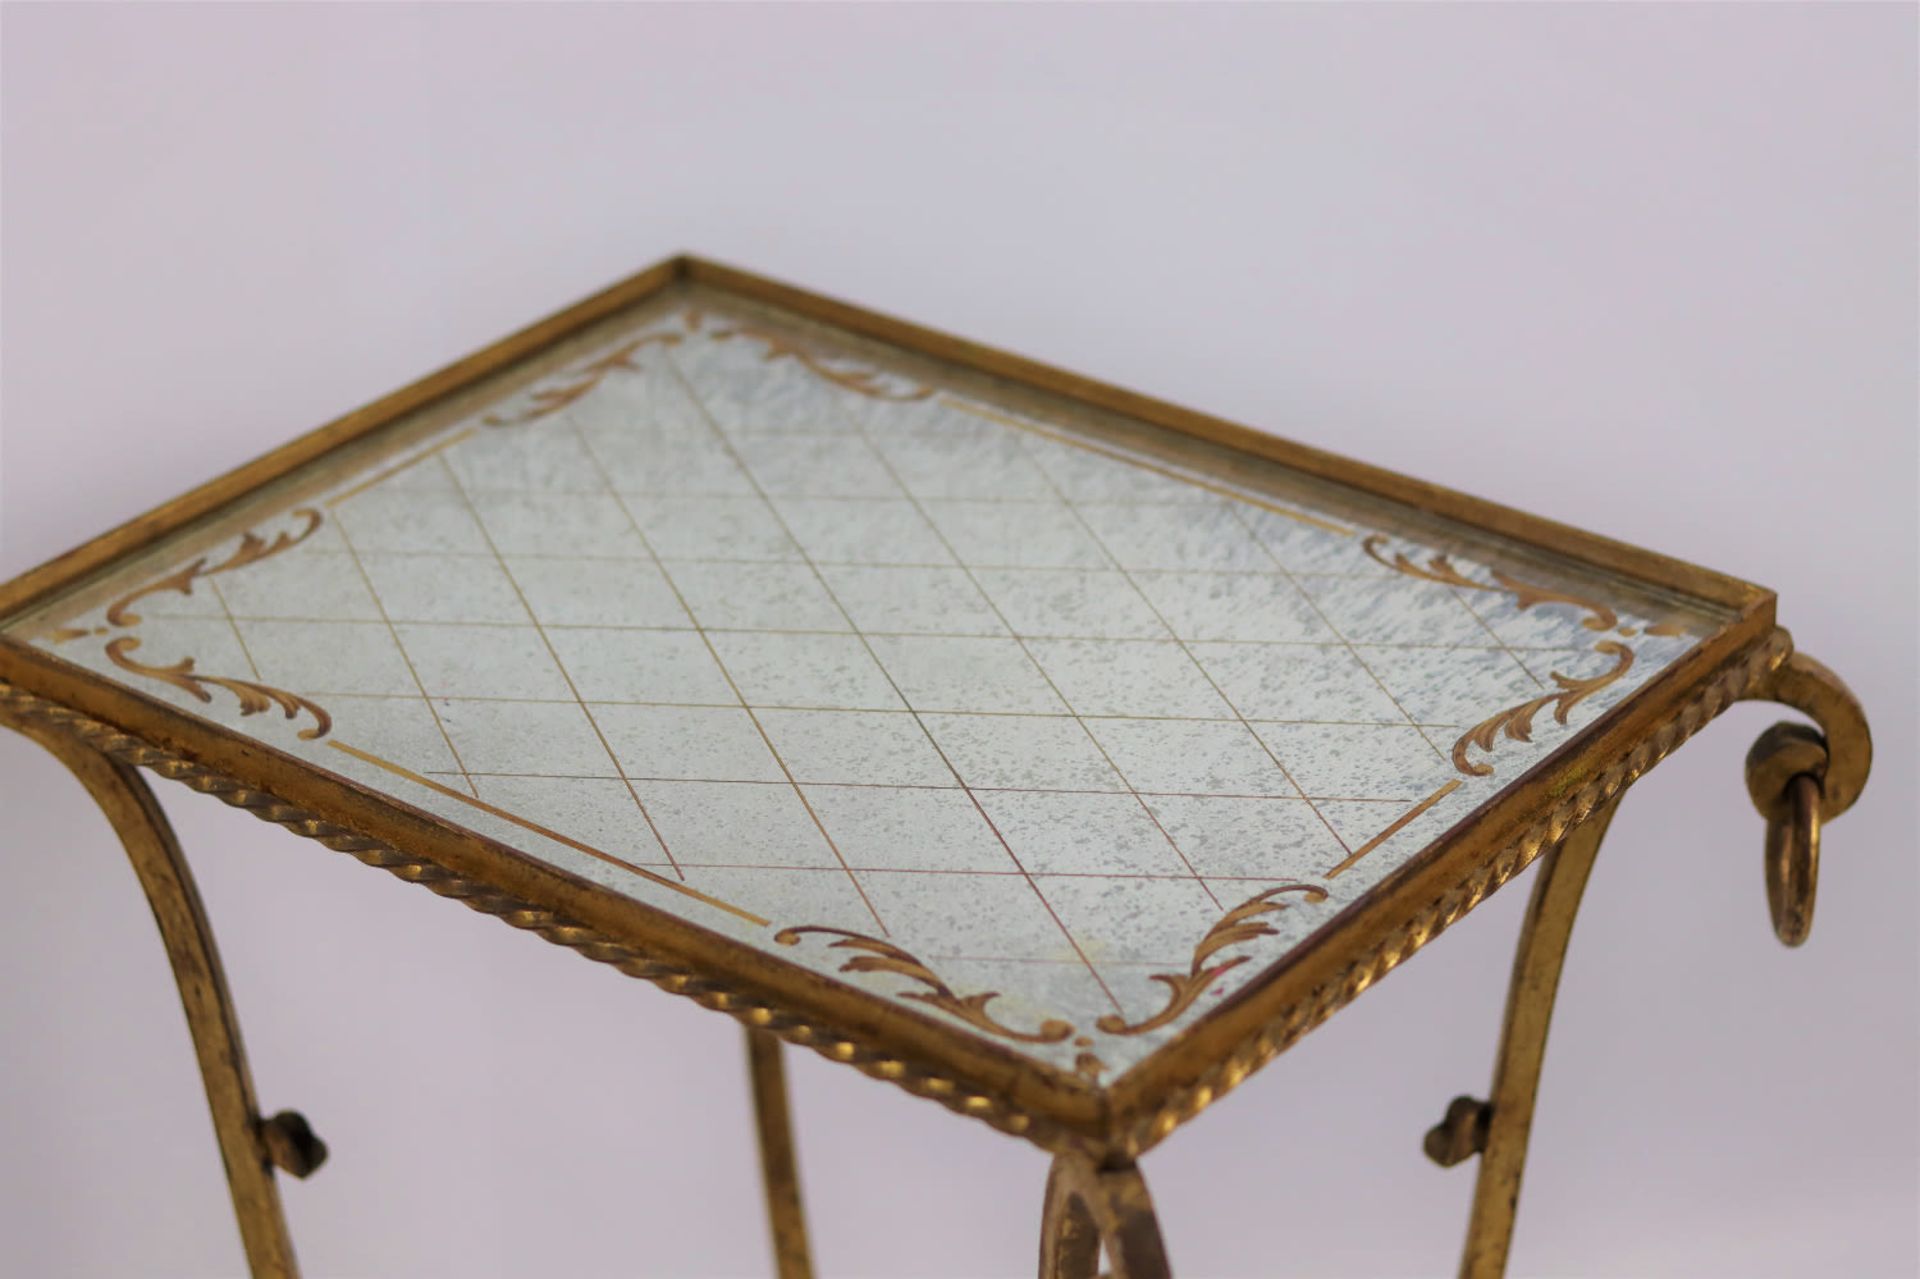 A wrought iron end side table with a gold glomyized mirrored glass top. Mid 20th Century - Image 2 of 2